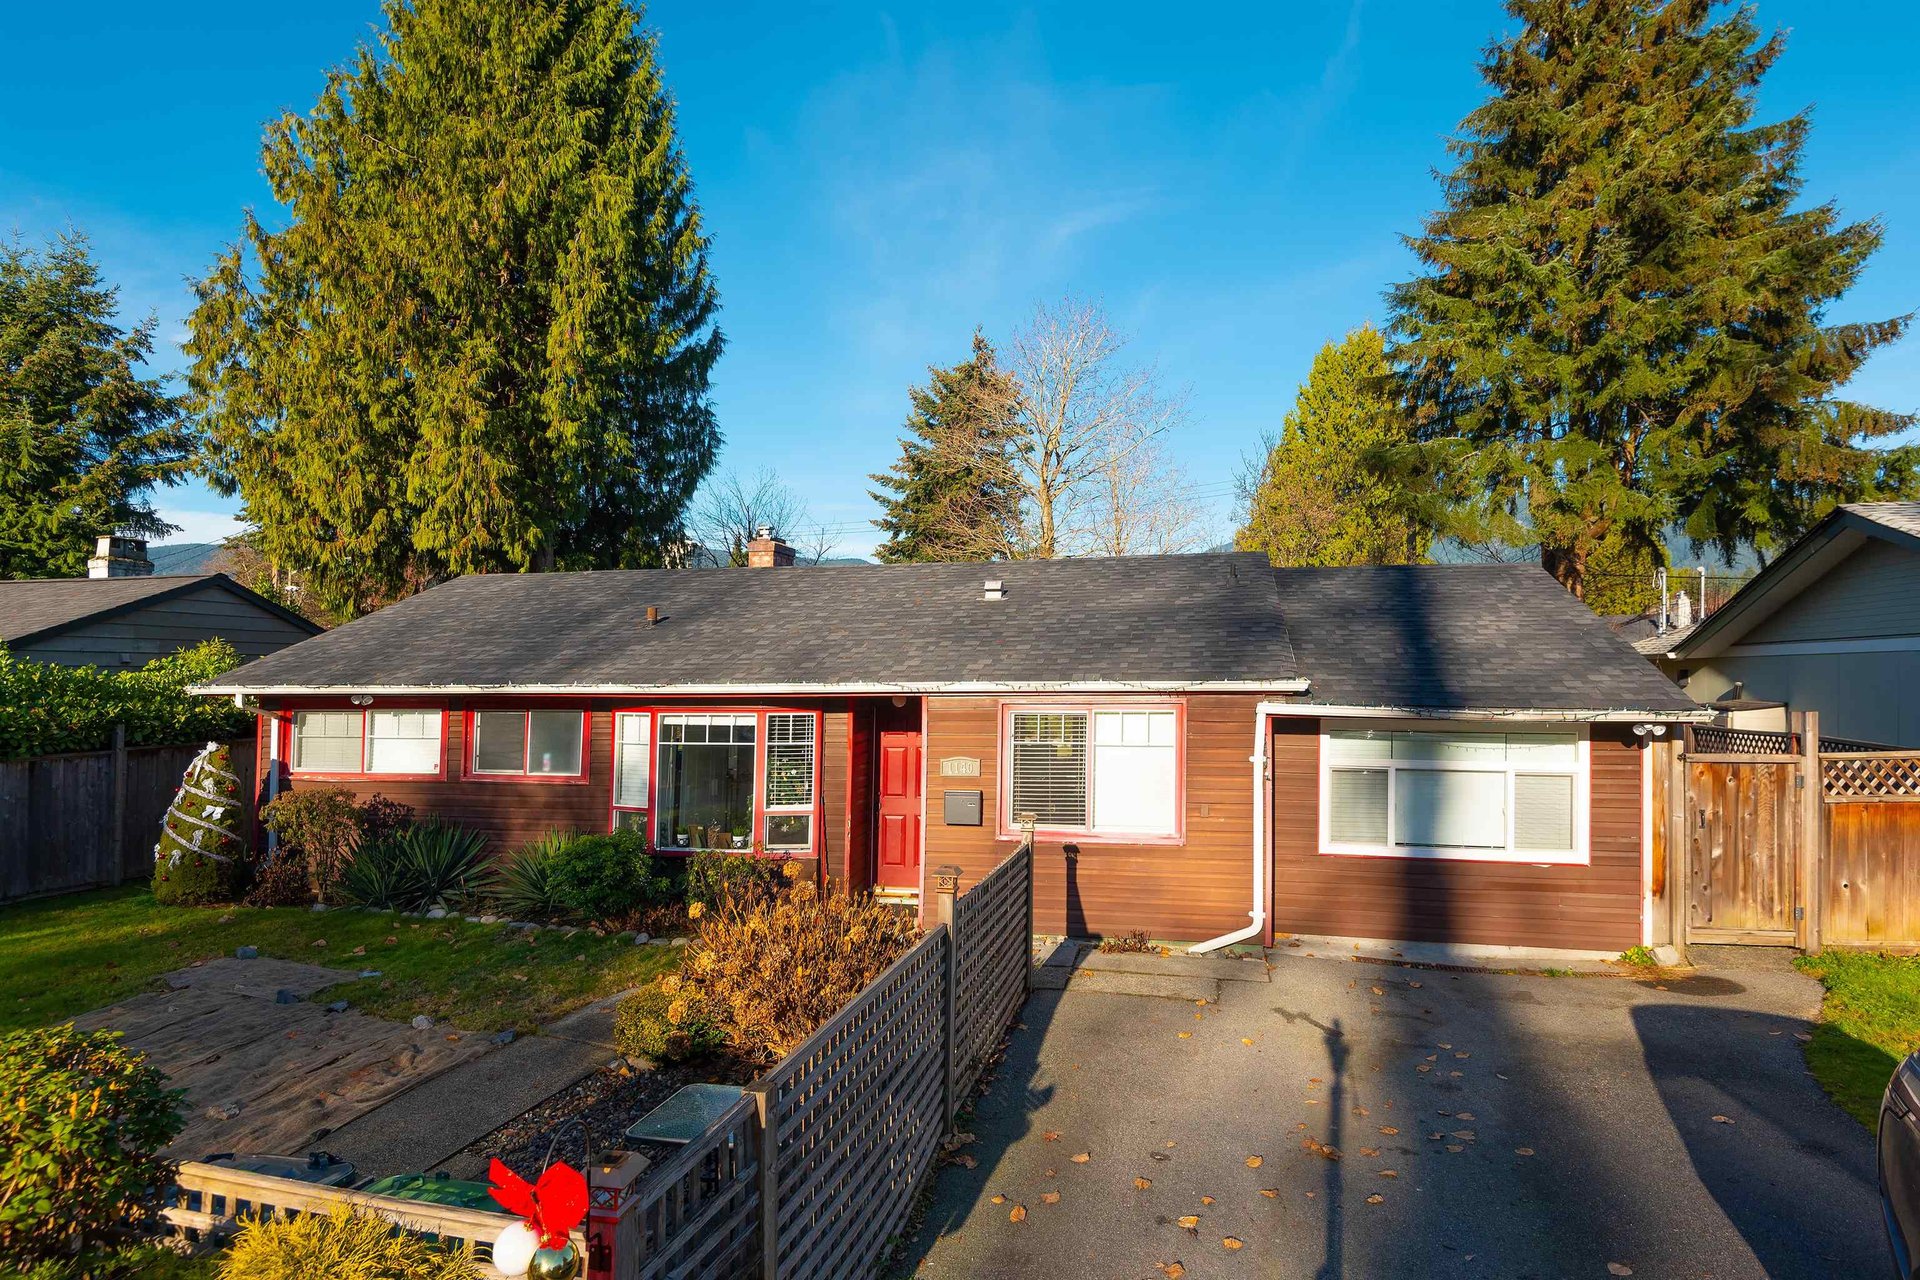 1140 Maplewood crescent north vancouver forelcosure listing for sale court ordered